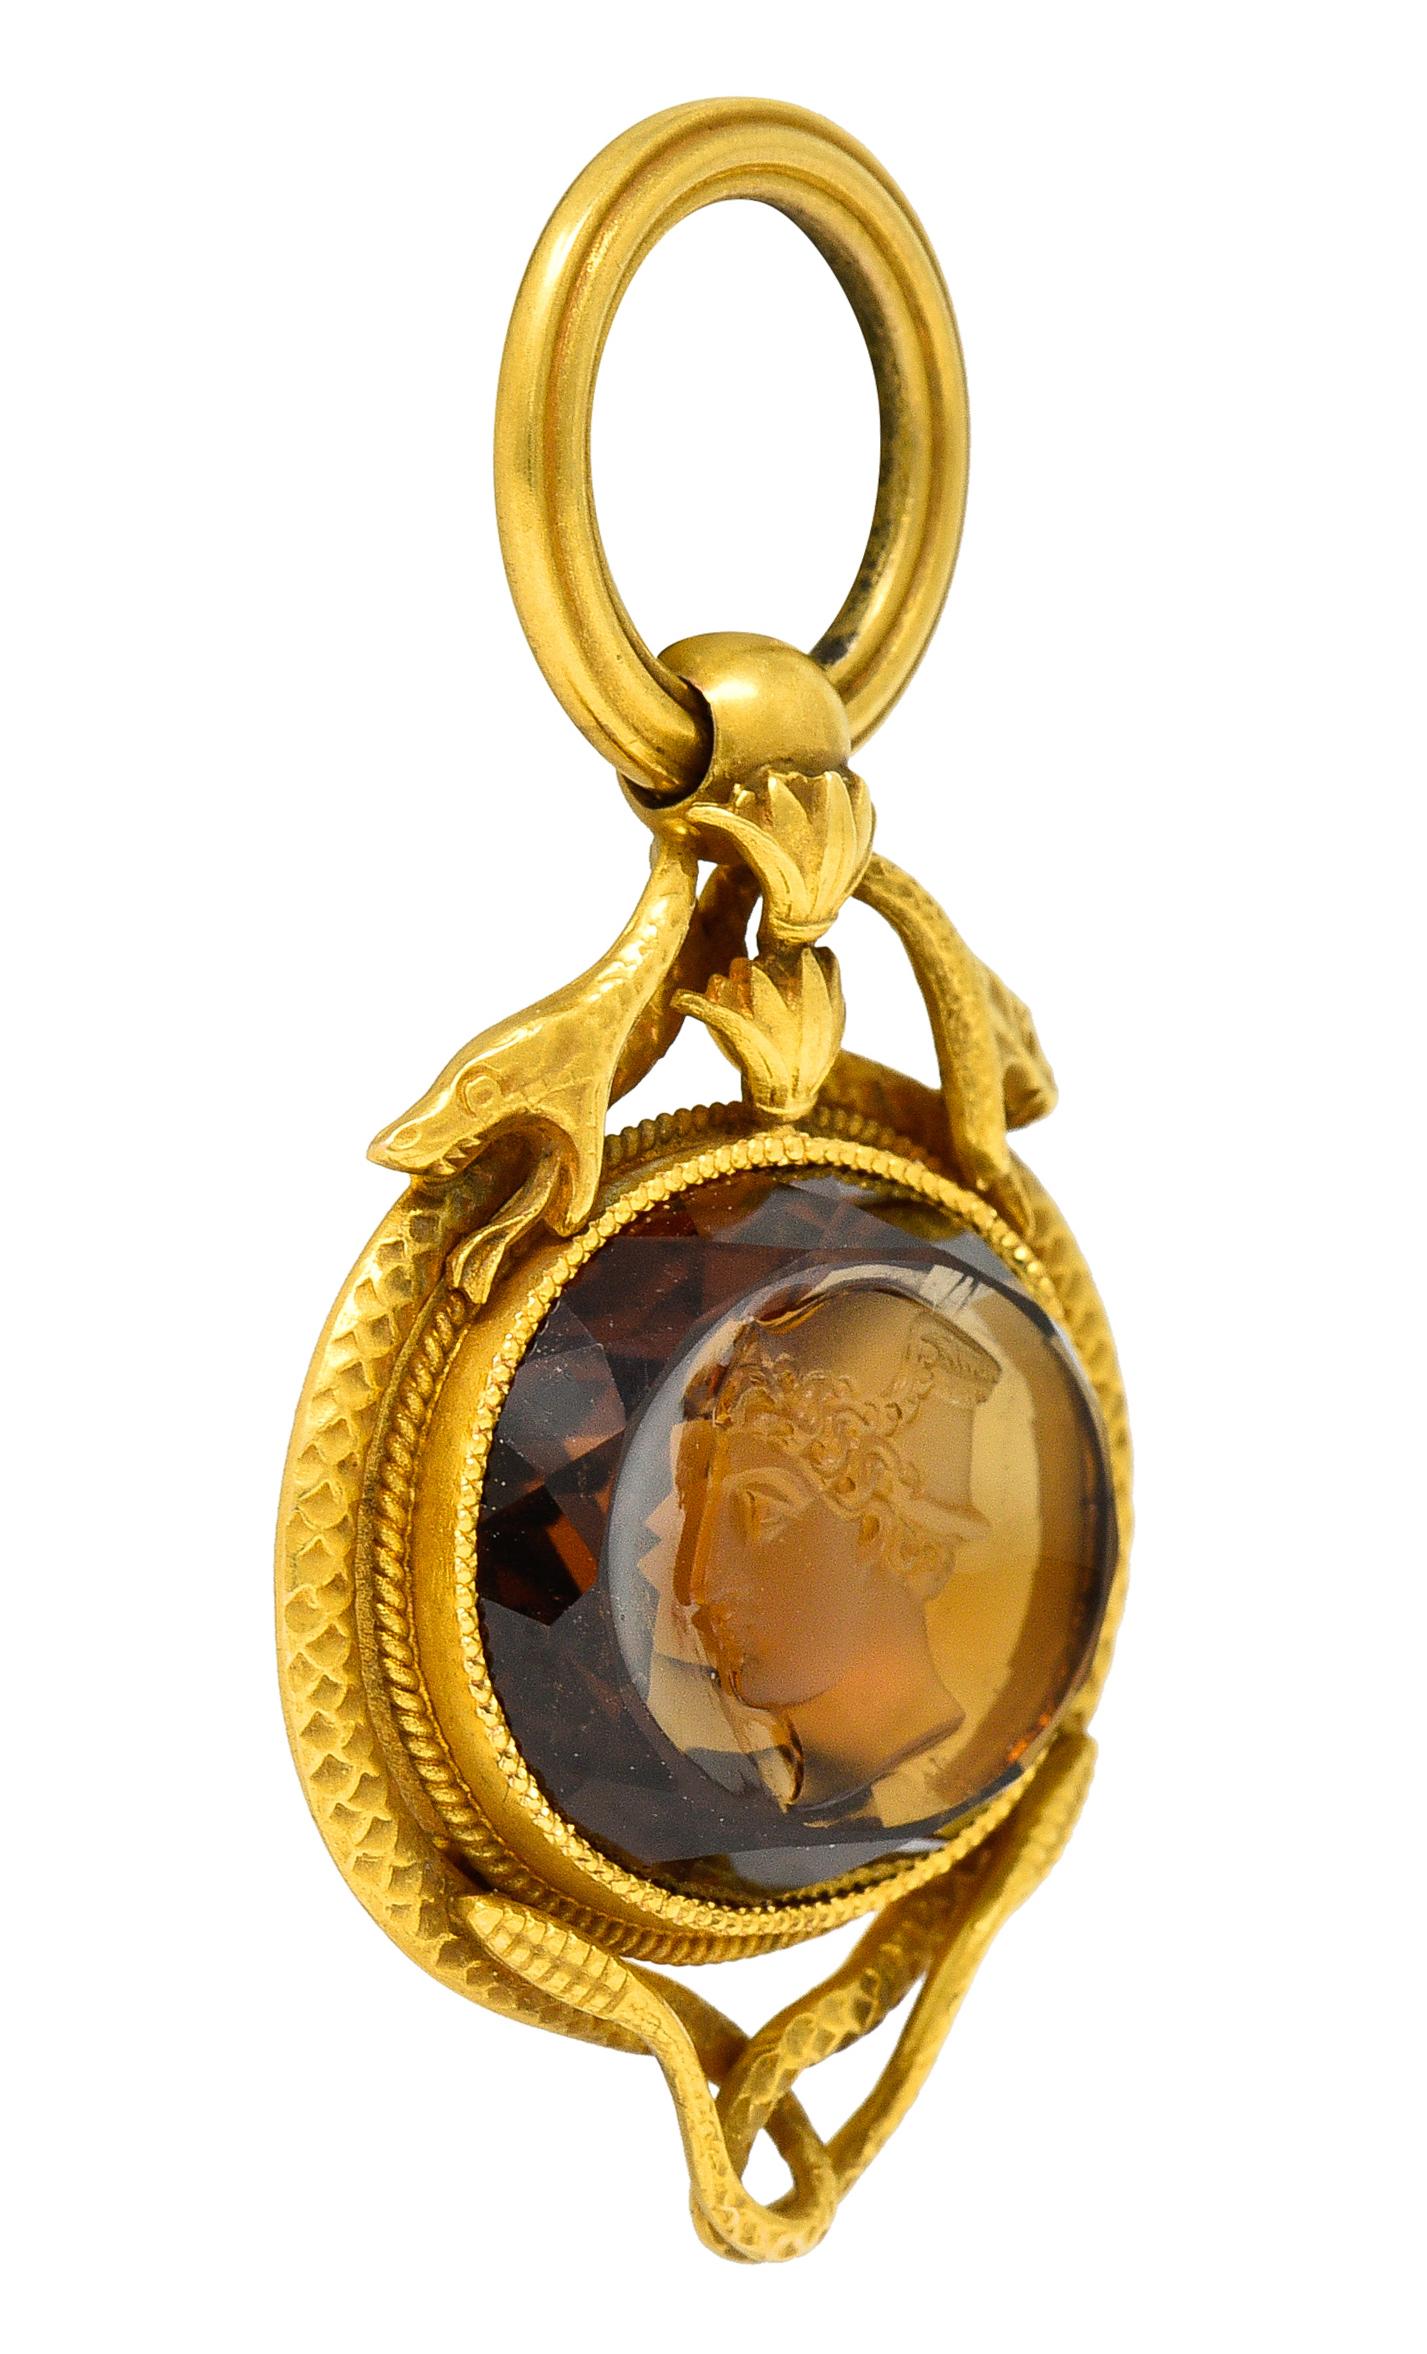 Centering a mixed cut oval citrine intaglio measuring 15.0 x 19.0 mm - transparent medium orangey brown. Carved to depict the Greek god Hermès wearing his signature winged helmet. Set in milgrain bezel with dual snake surround - known as caduceus,